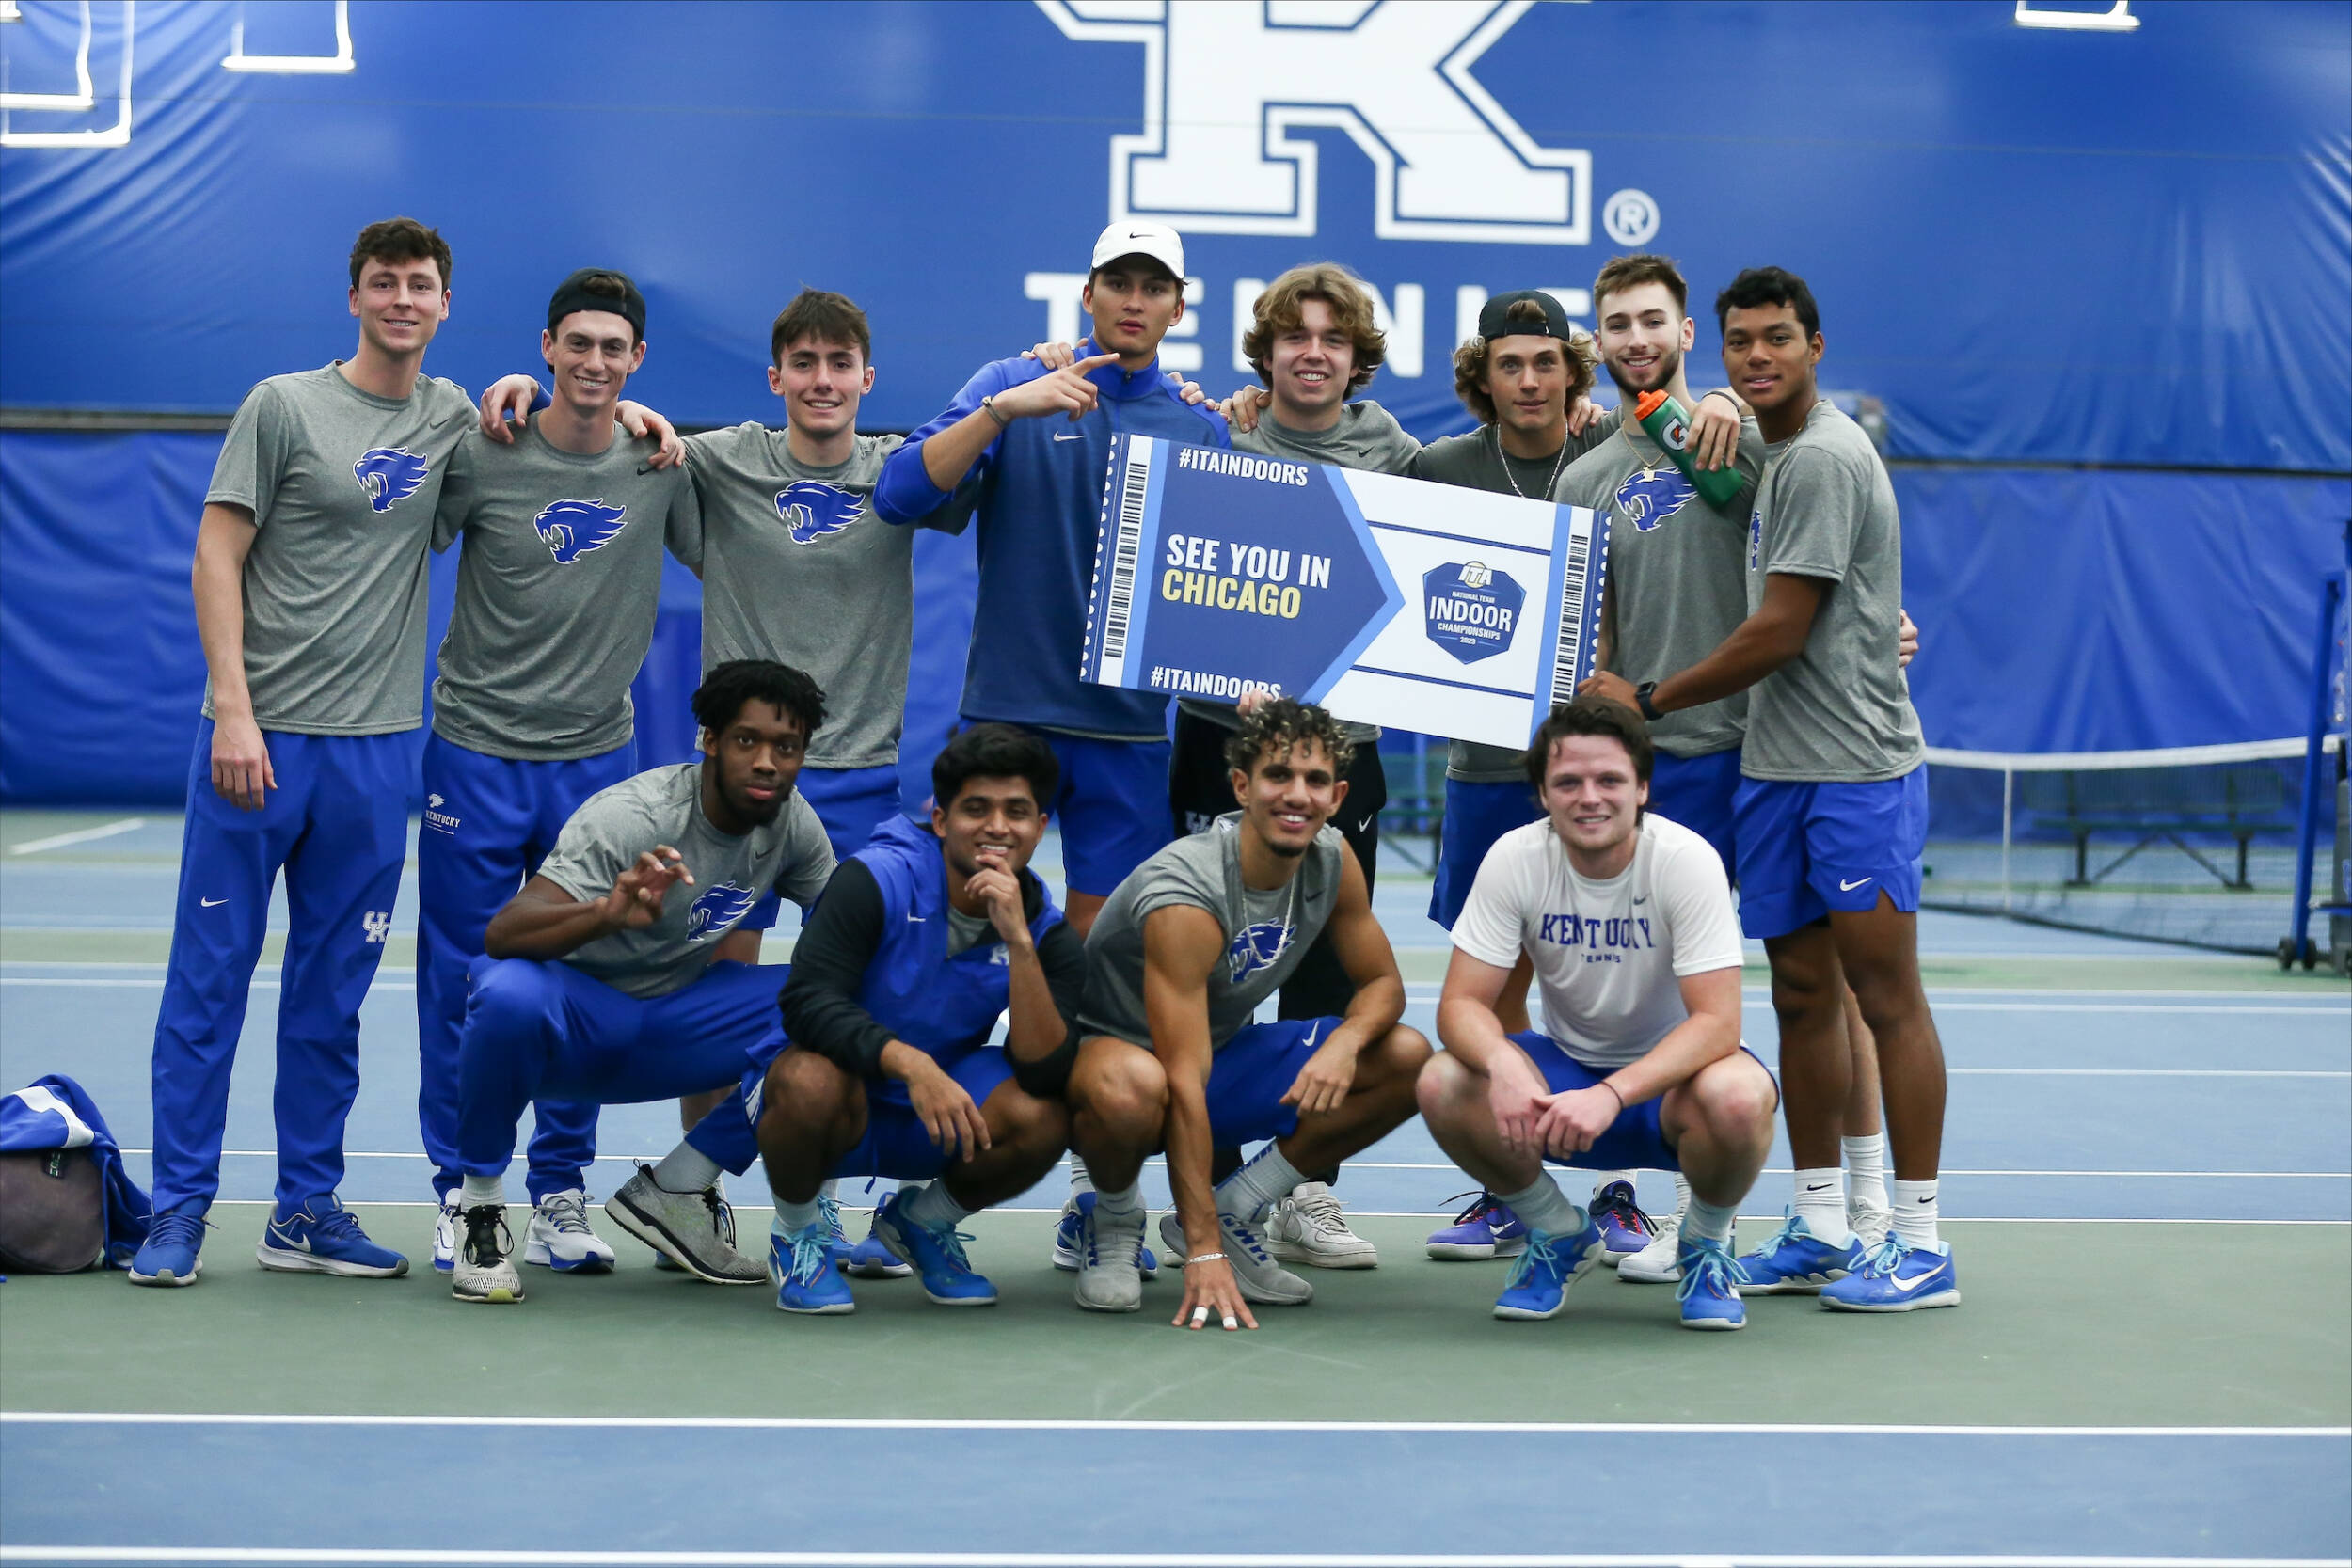 Kentucky Punches Ticket to ITA Nationals with 4-1 Win Over Notre Dame